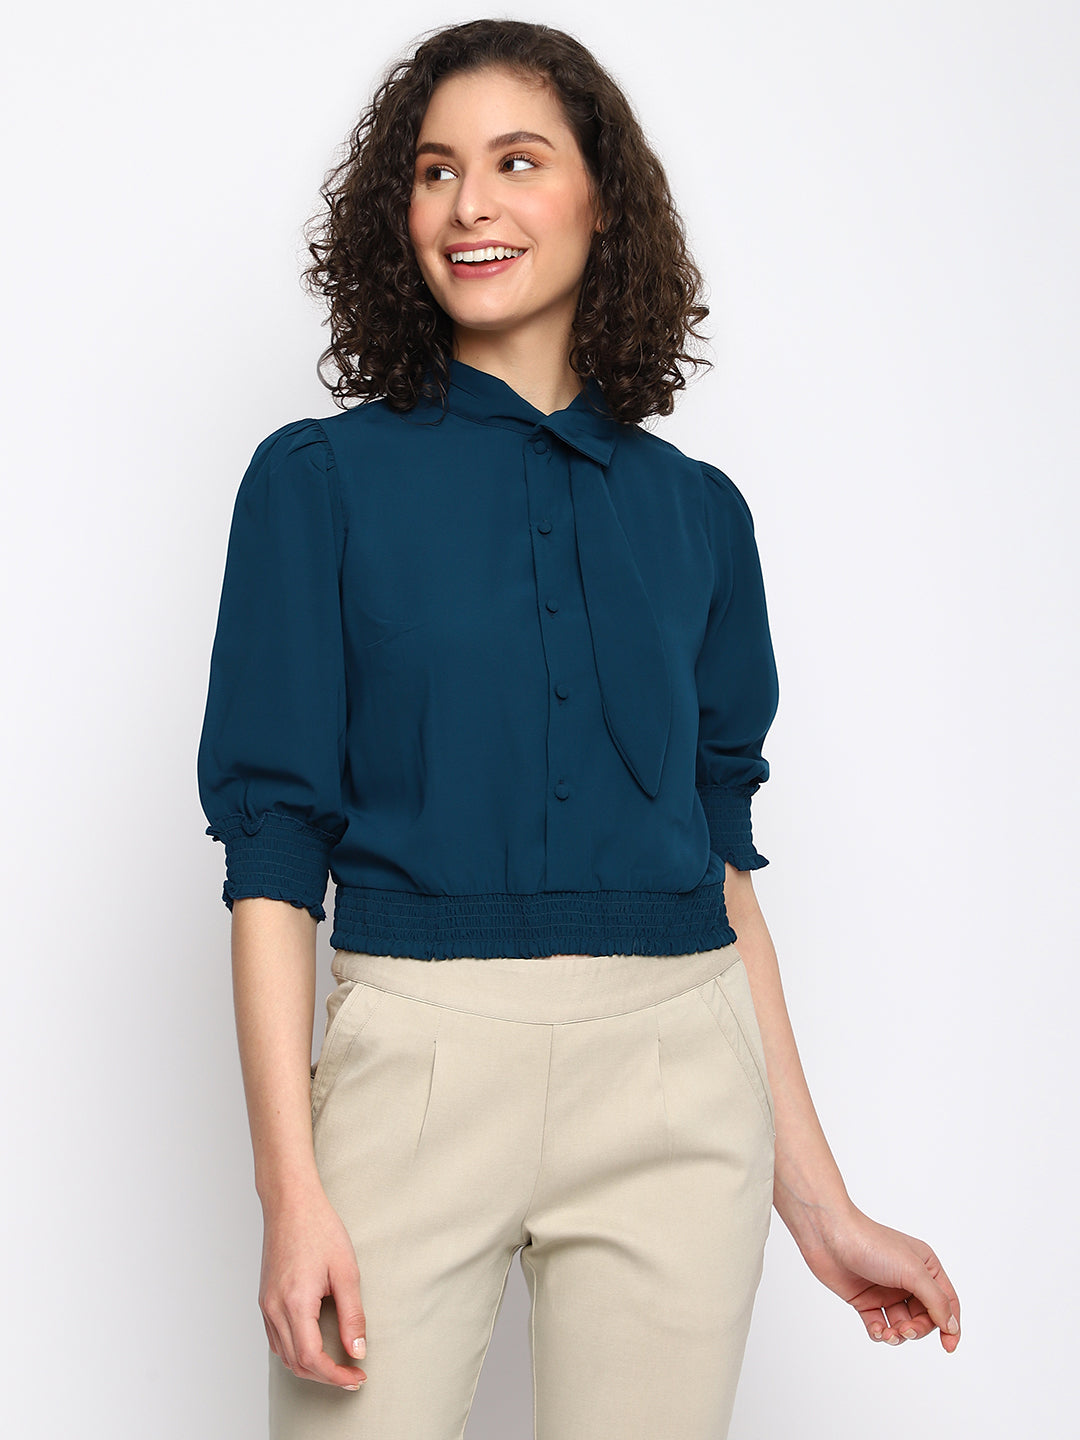 Teal 3/4 Sleeve Solid Polyester Blouse